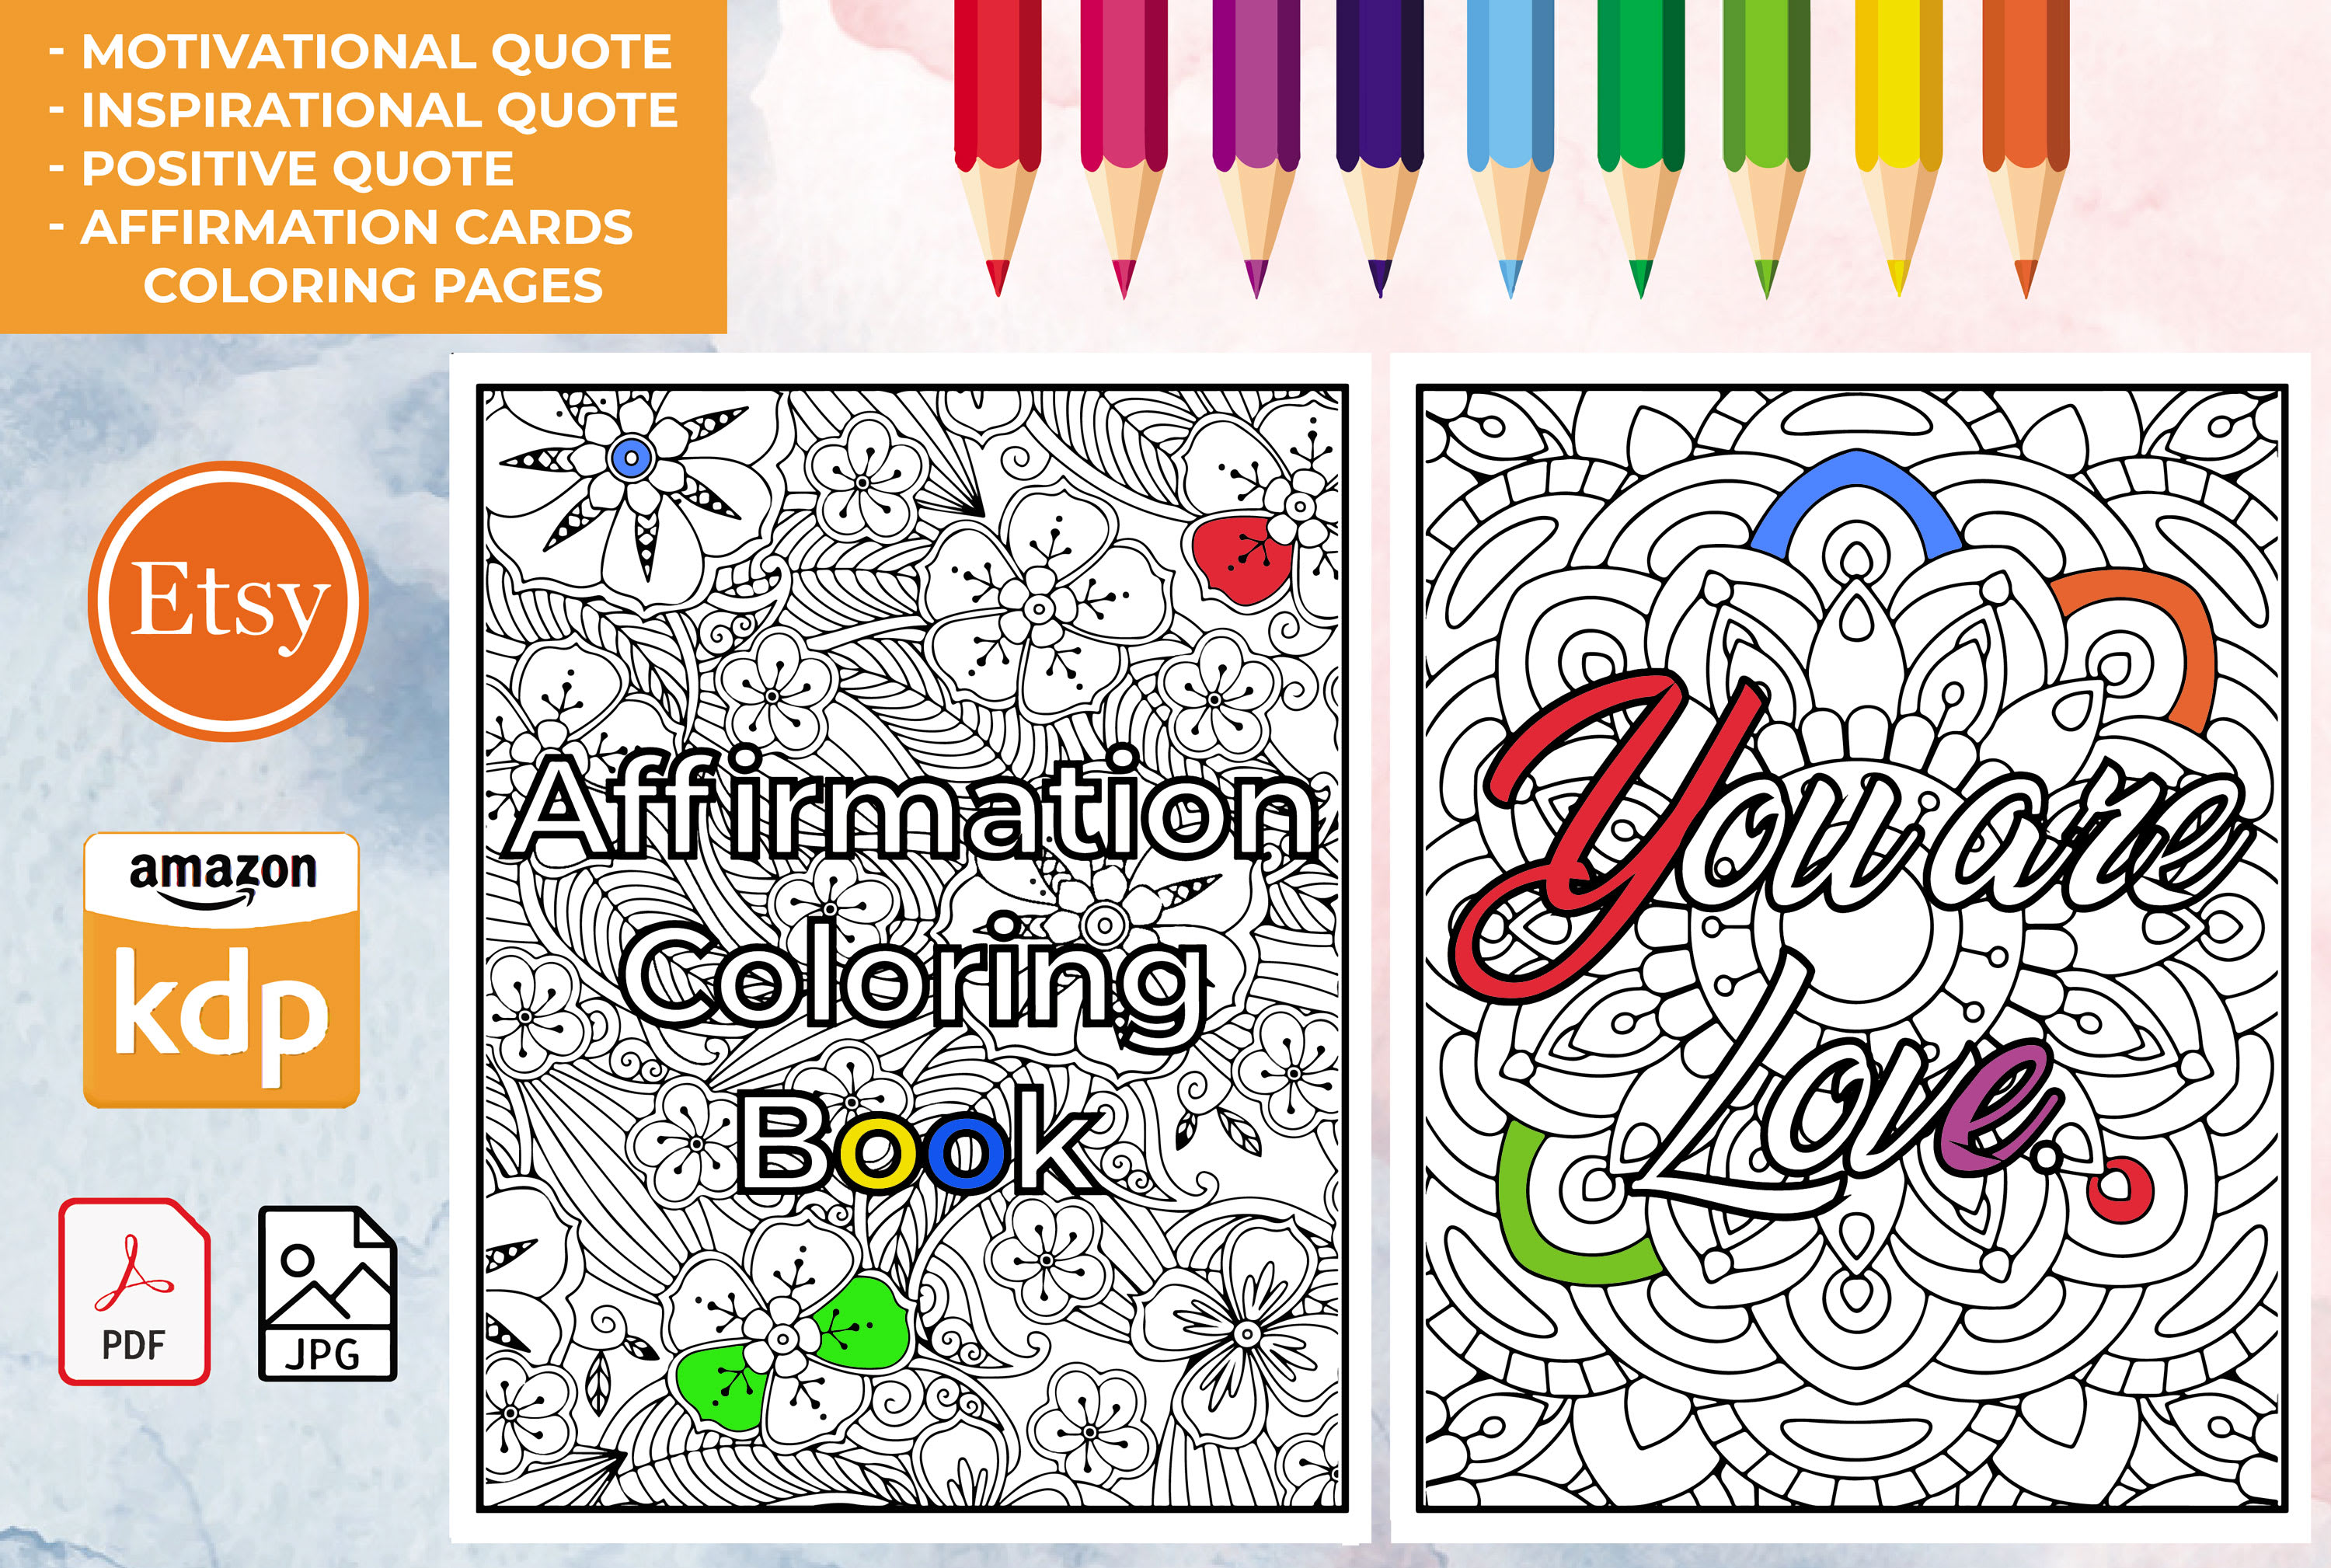 Design printable quotes coloring pages for you by zouanone